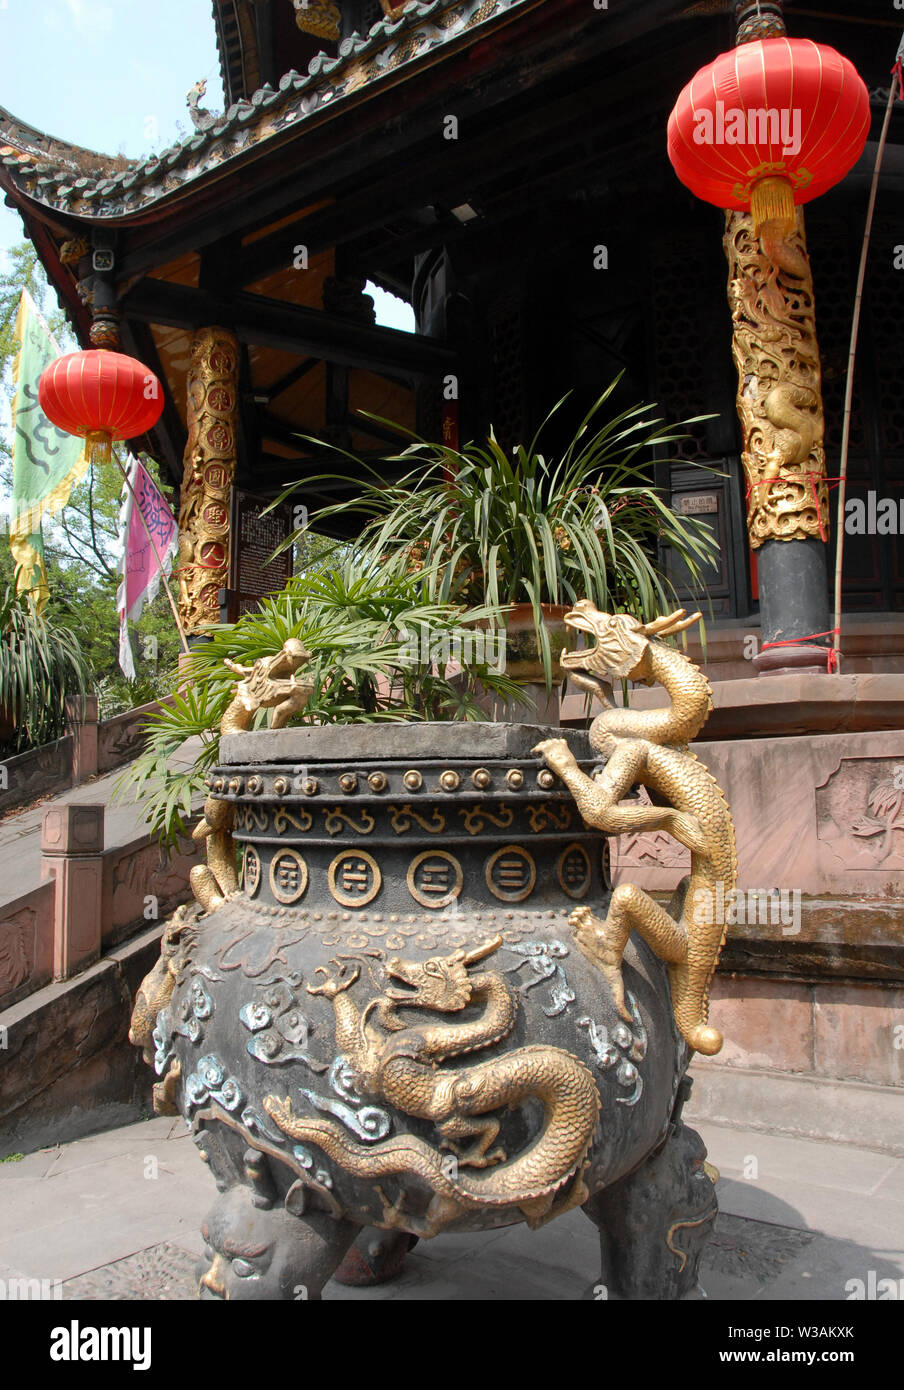 Eight Trigrams Pavillion at the Green Ram Temple or Green Goat Temple in Chengdu, China. Also the Green Ram or Goat Monastery. A Chinese taoist temple Stock Photo